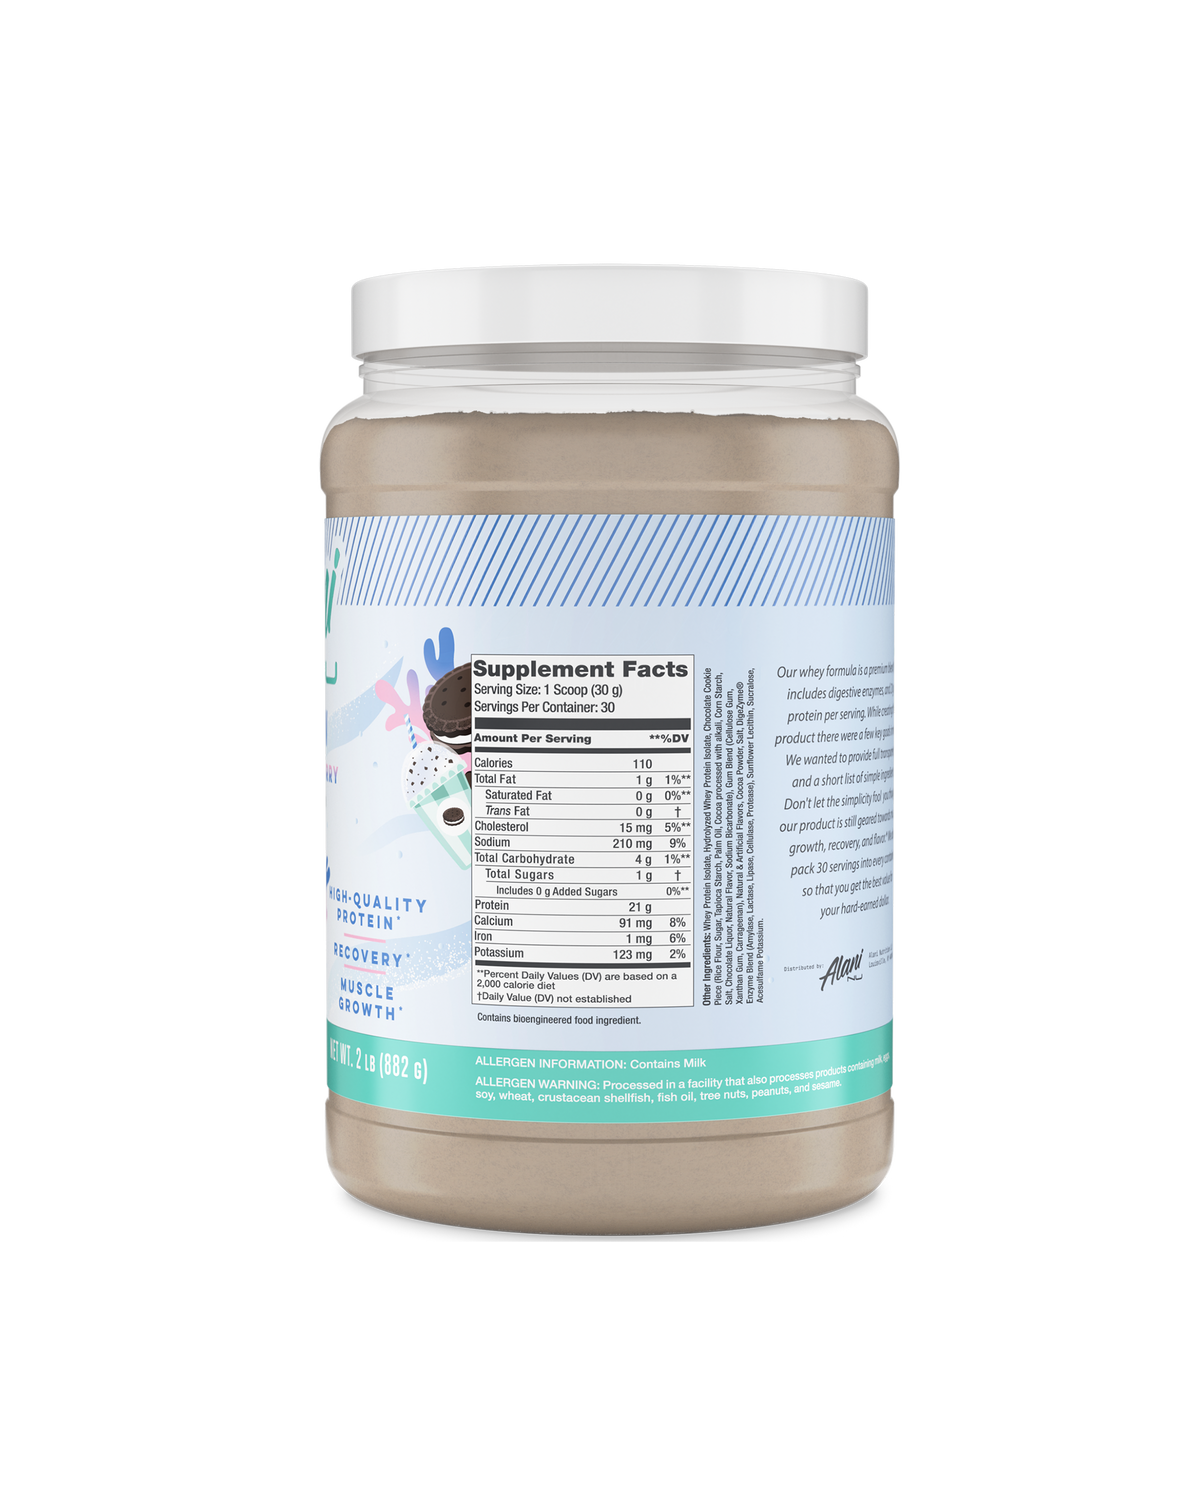 A back view of Whey Protein in Frosted Flurry flavor highlighting supplement facts.